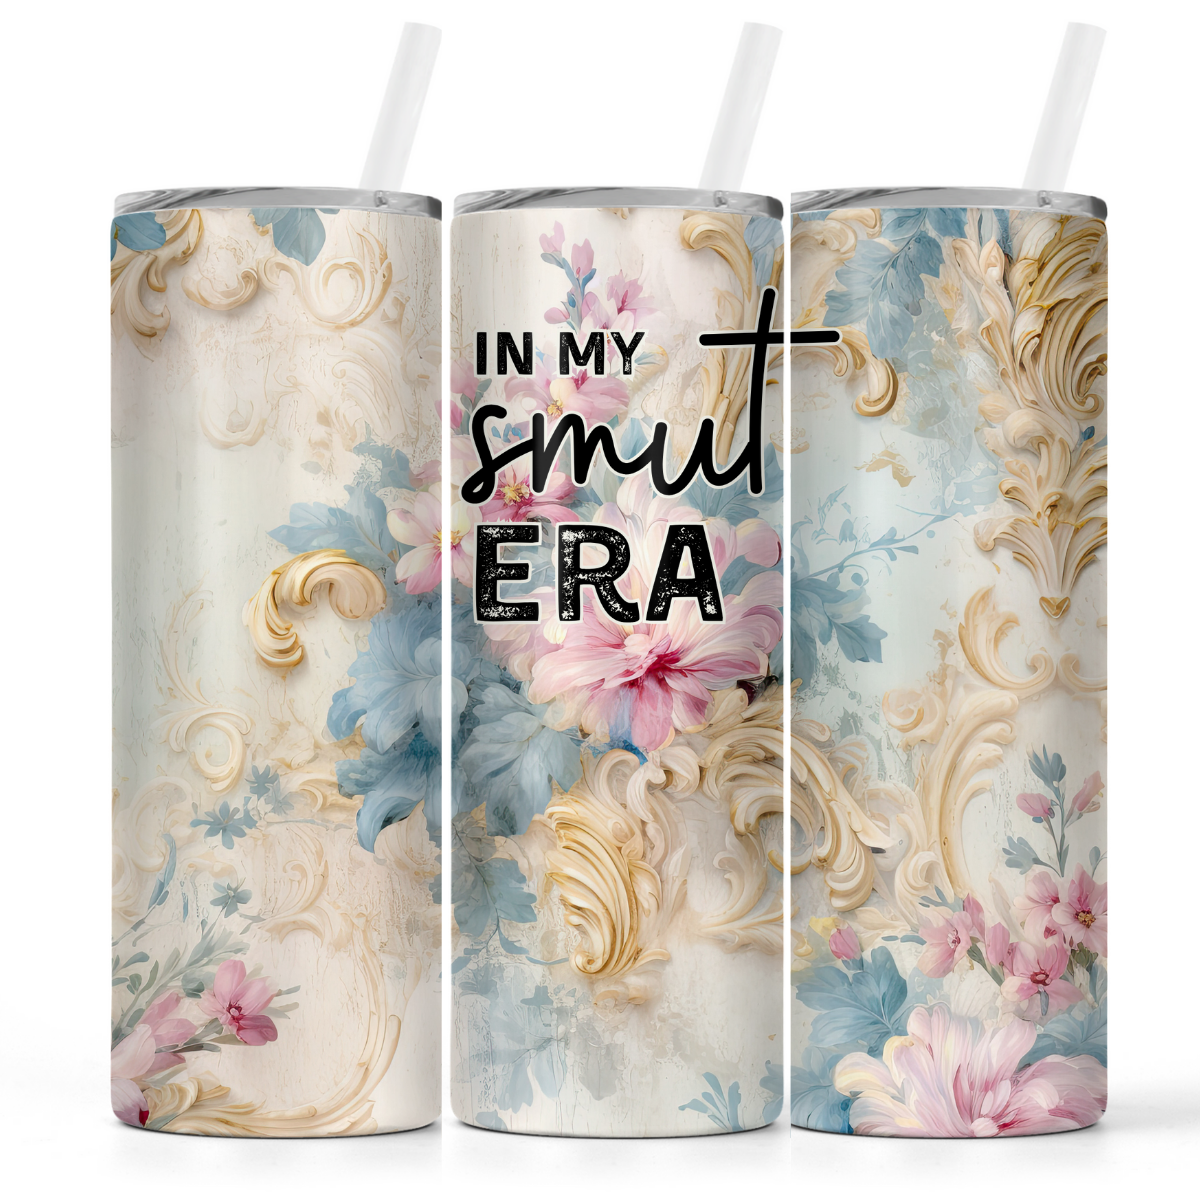 In My Smut Era | Book Lovers Tumbler - The Pretty Things.ca